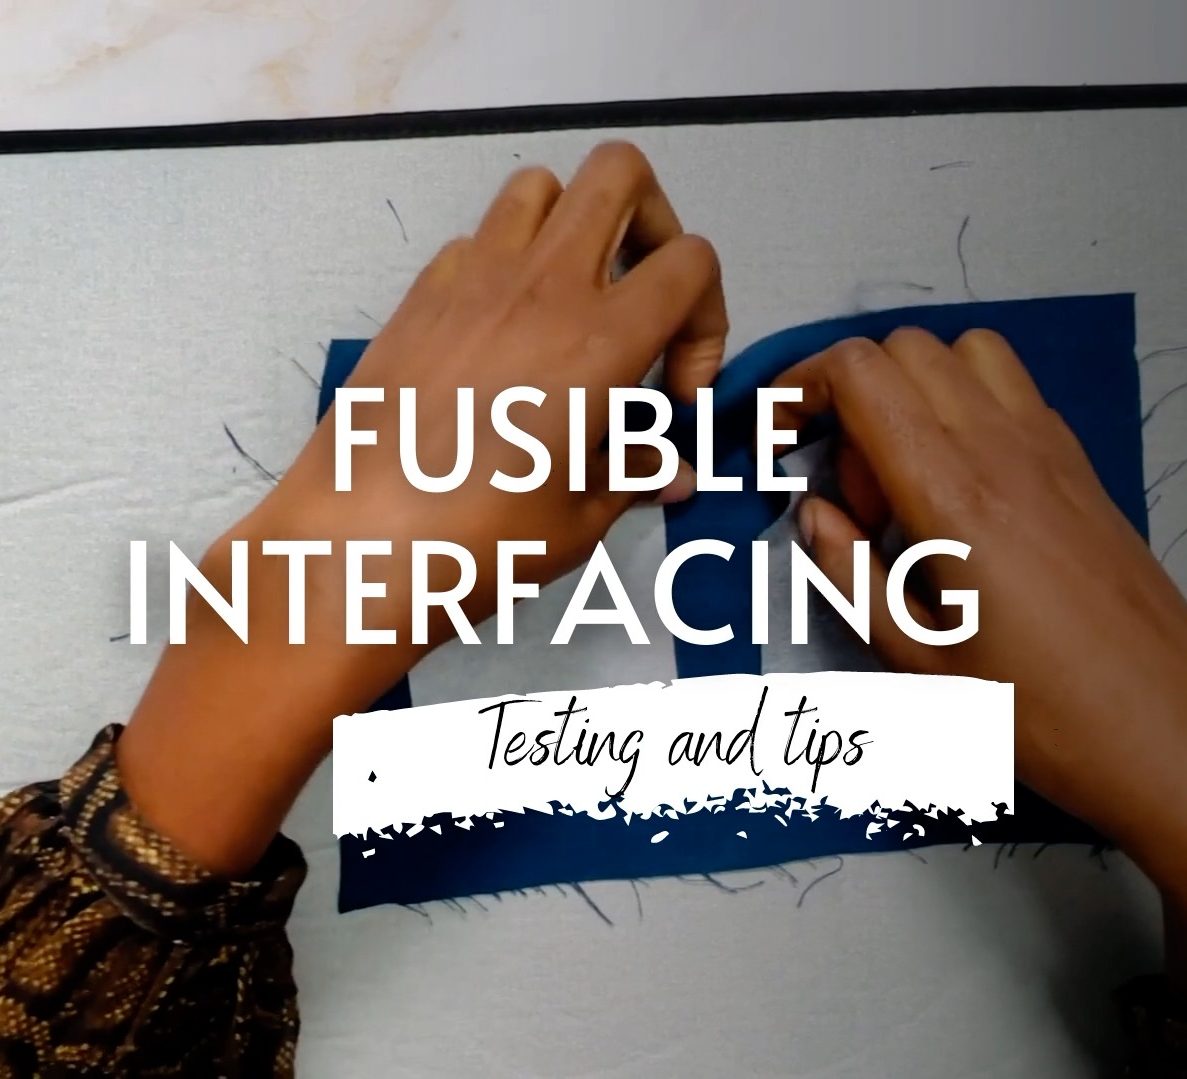 How To Use Fusible Interfacing (Video + Tips And Tricks)